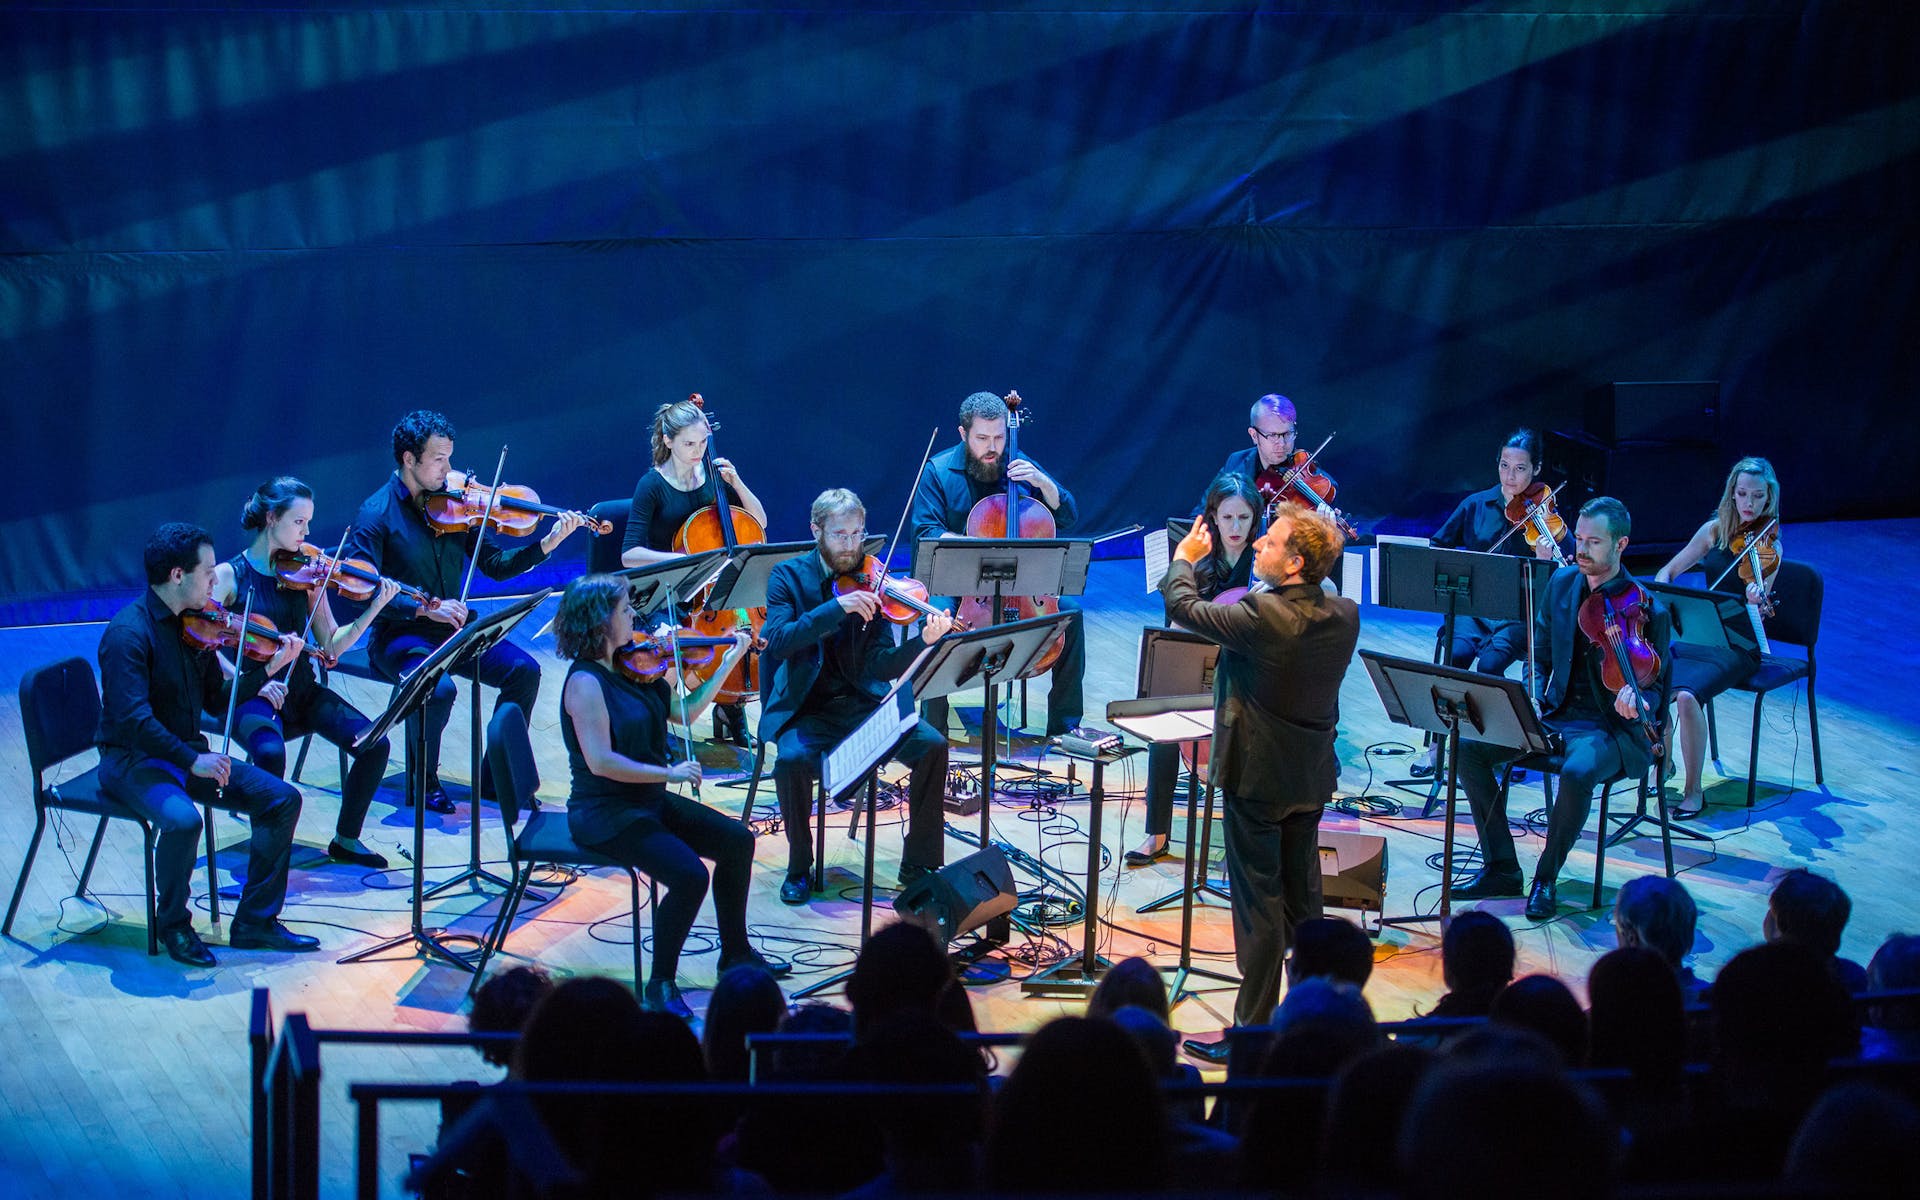 A strings ensemble plays music in front of a conductor while bathed in projected blue lights.